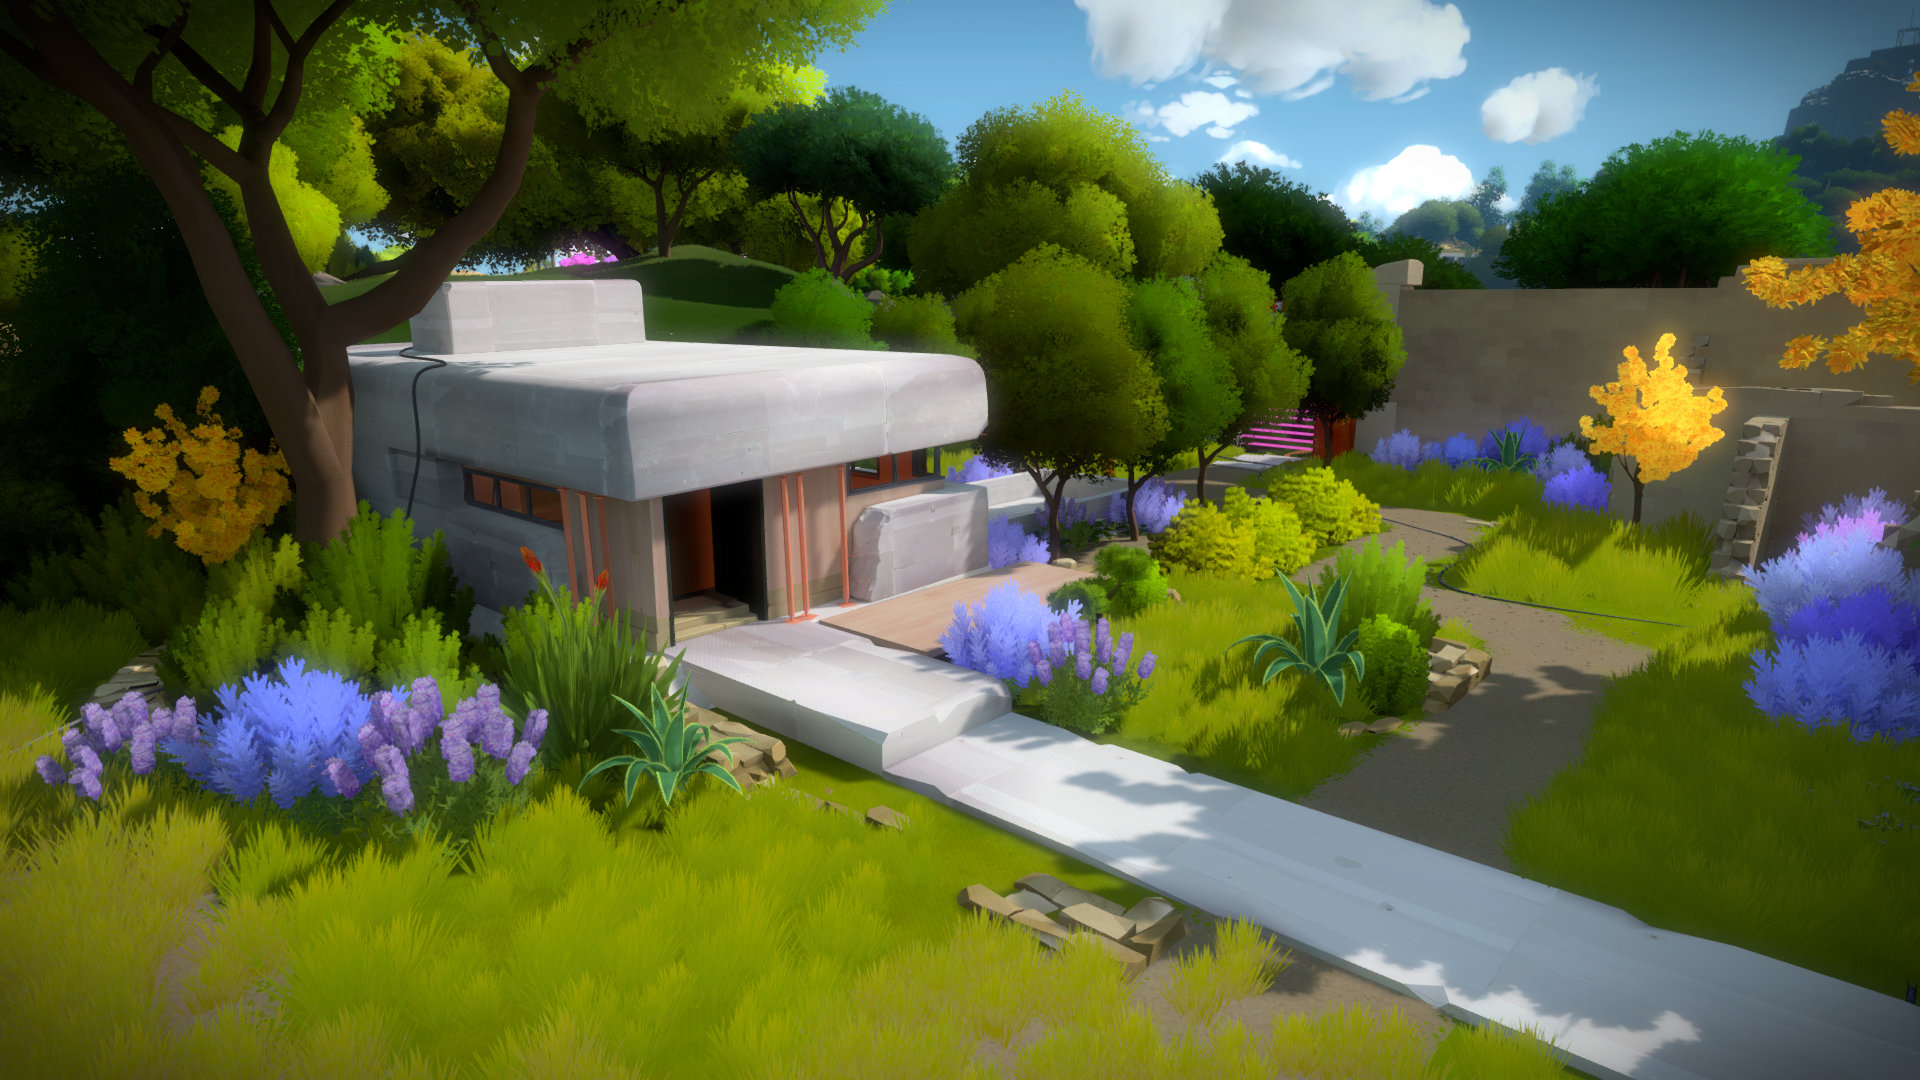 video game, the witness